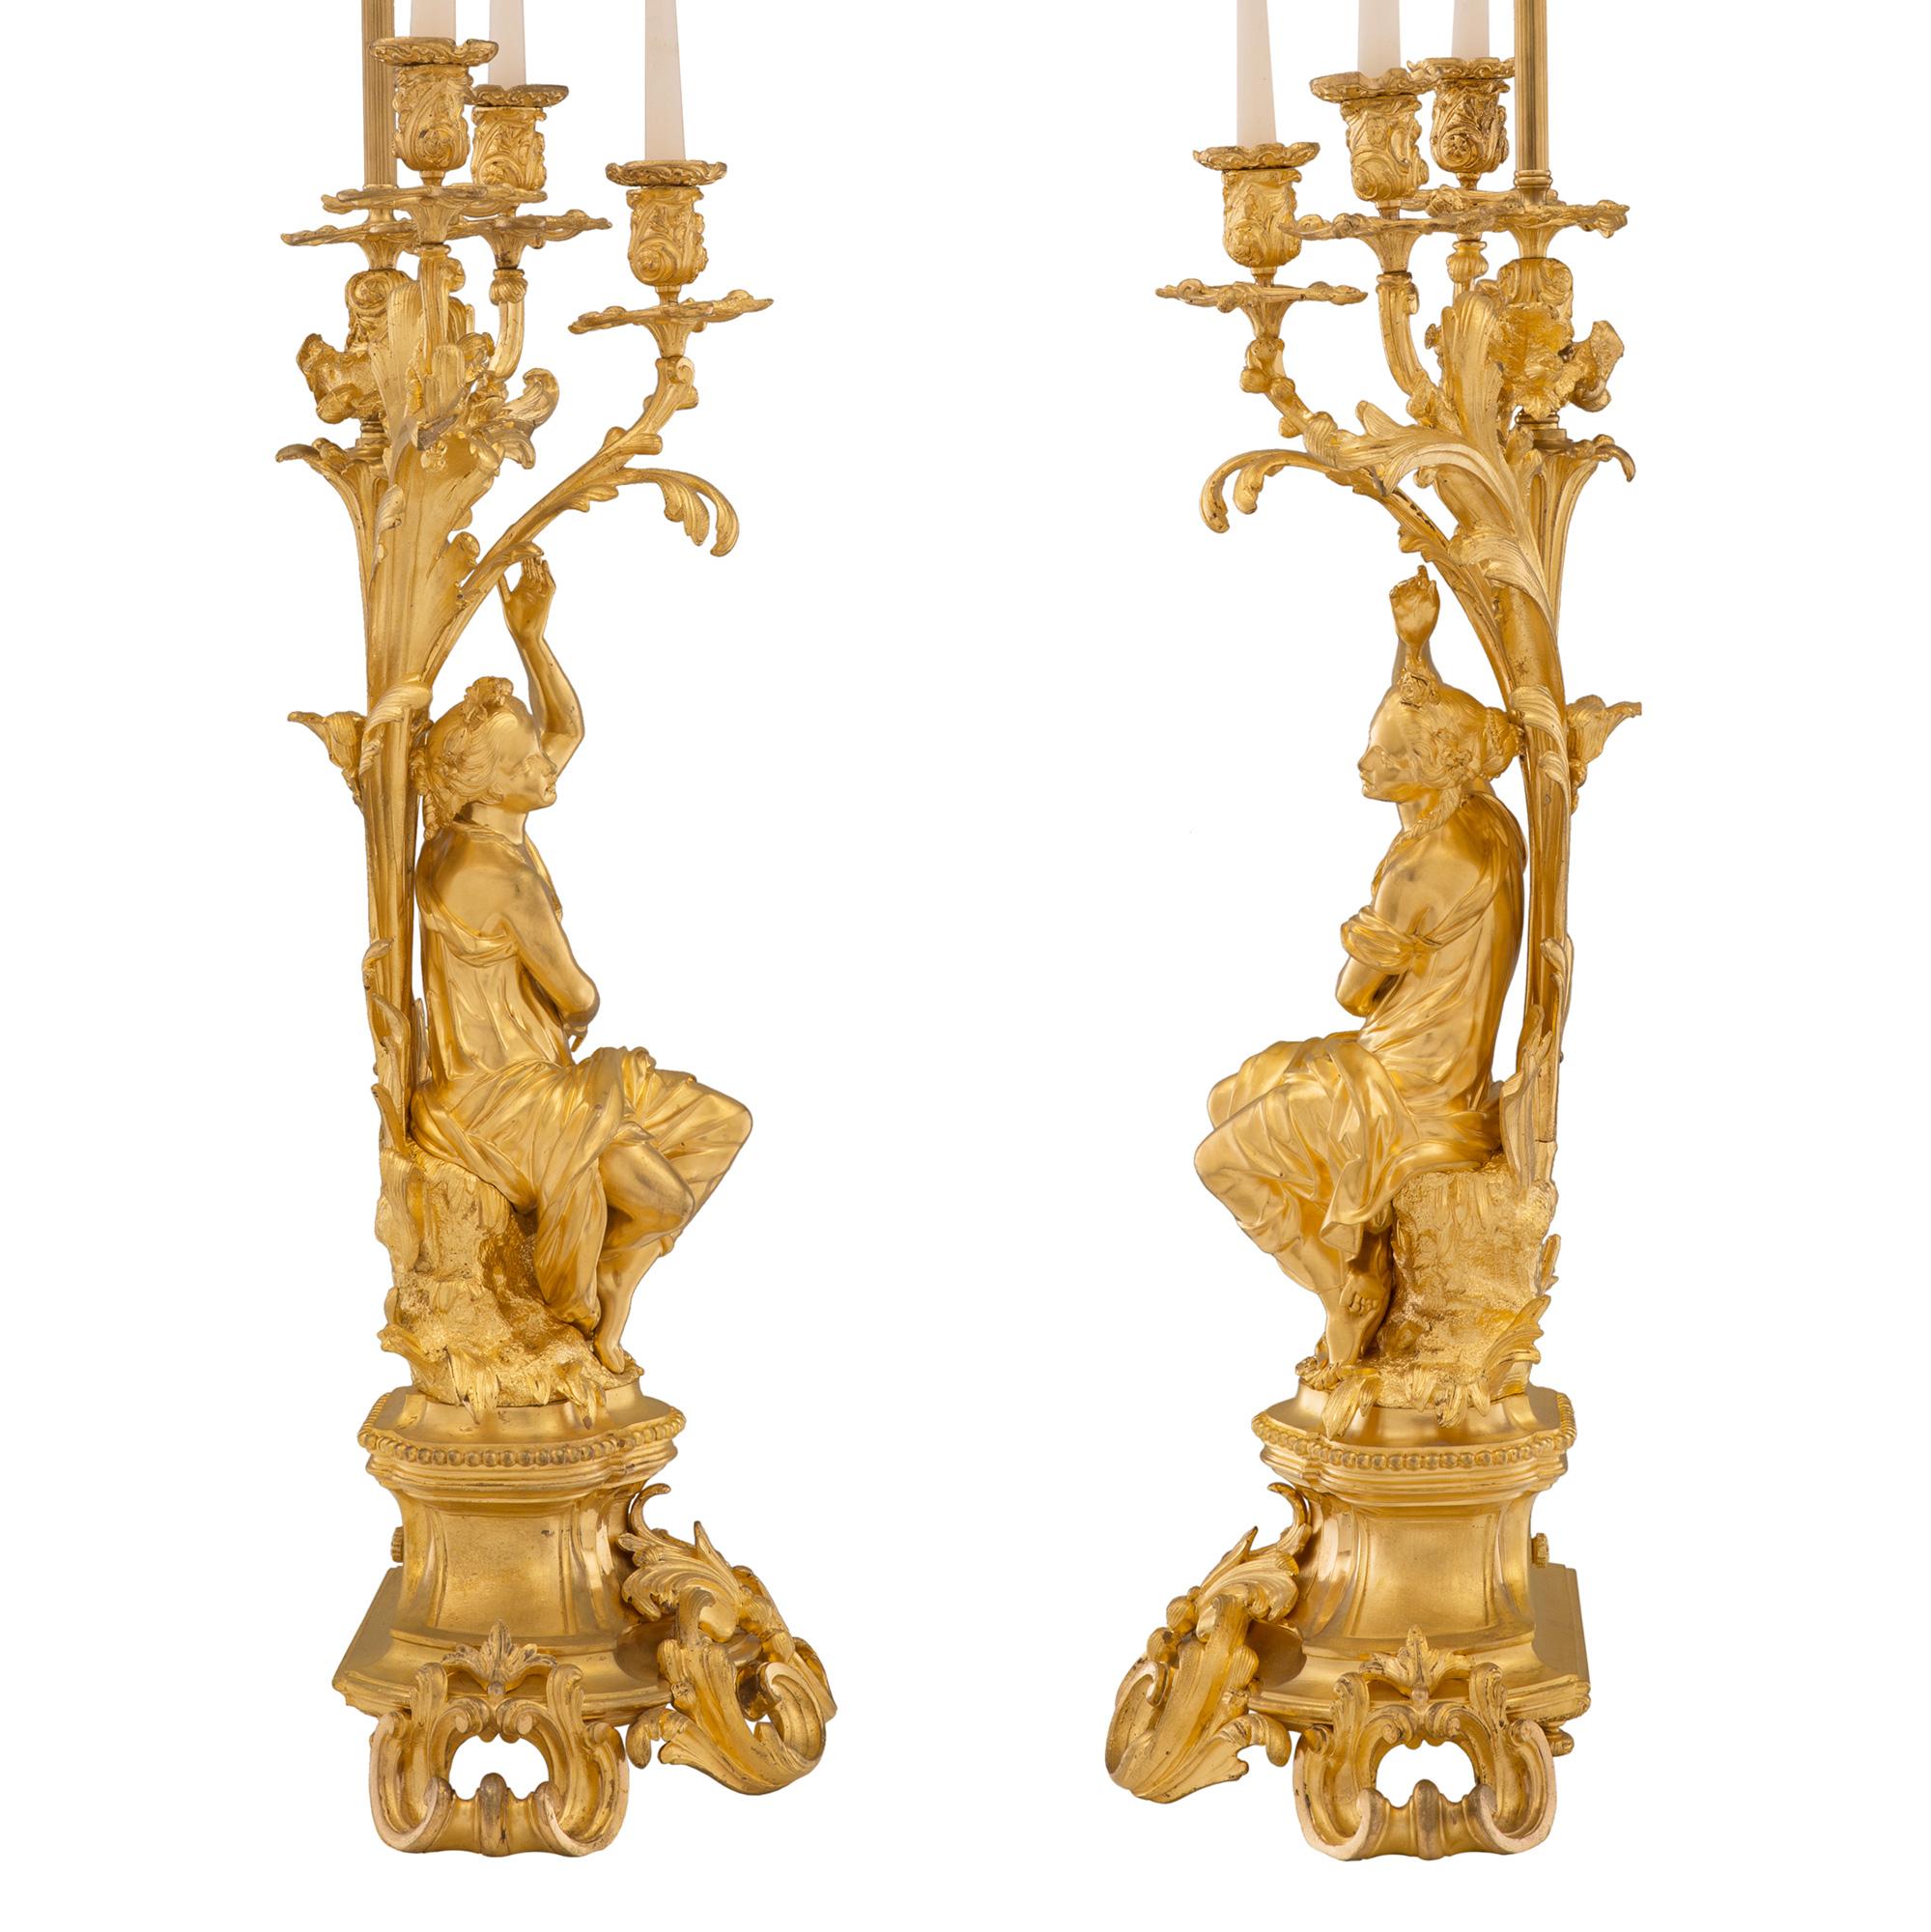 Ormolu Pair of French 19th Century Belle Époque Period Lamps, Signed Picard For Sale